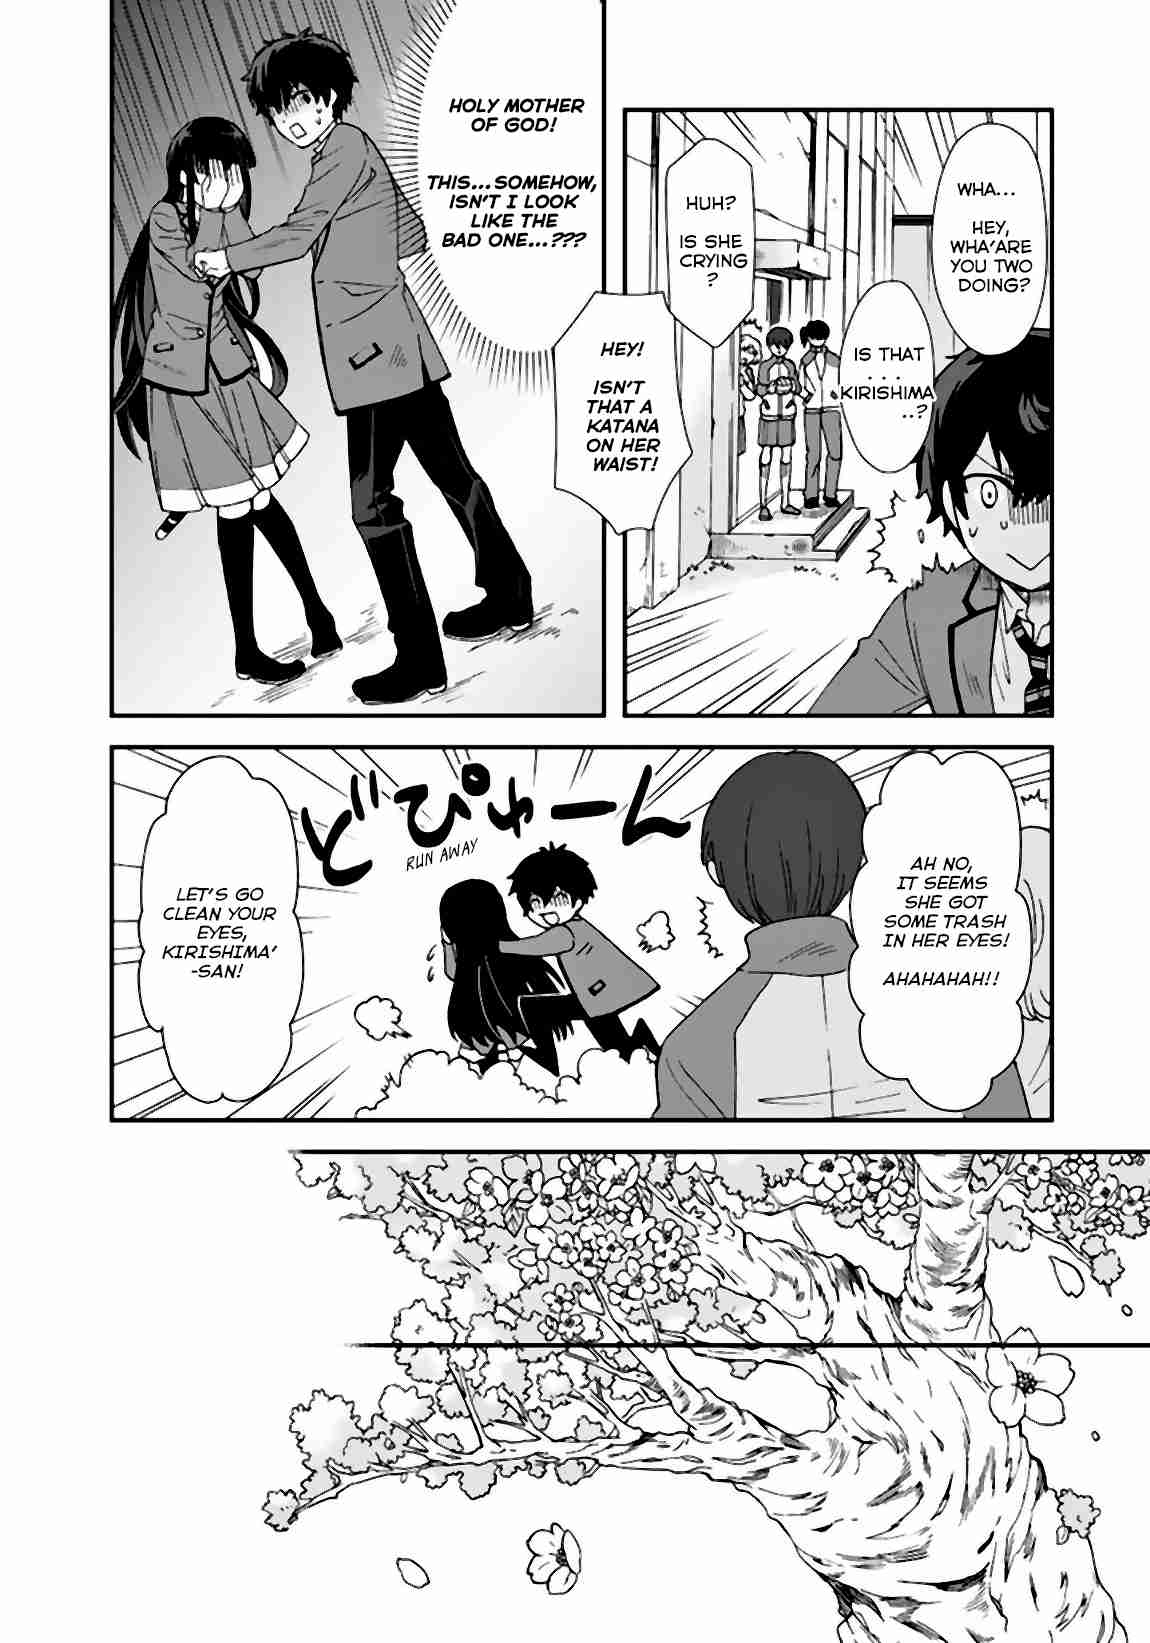 I, Who Acquired a Trash Skill 【Thermal Operator】, Became Unrivaled. Vol. 1 Ch. 4 A fully bloomed Sakura